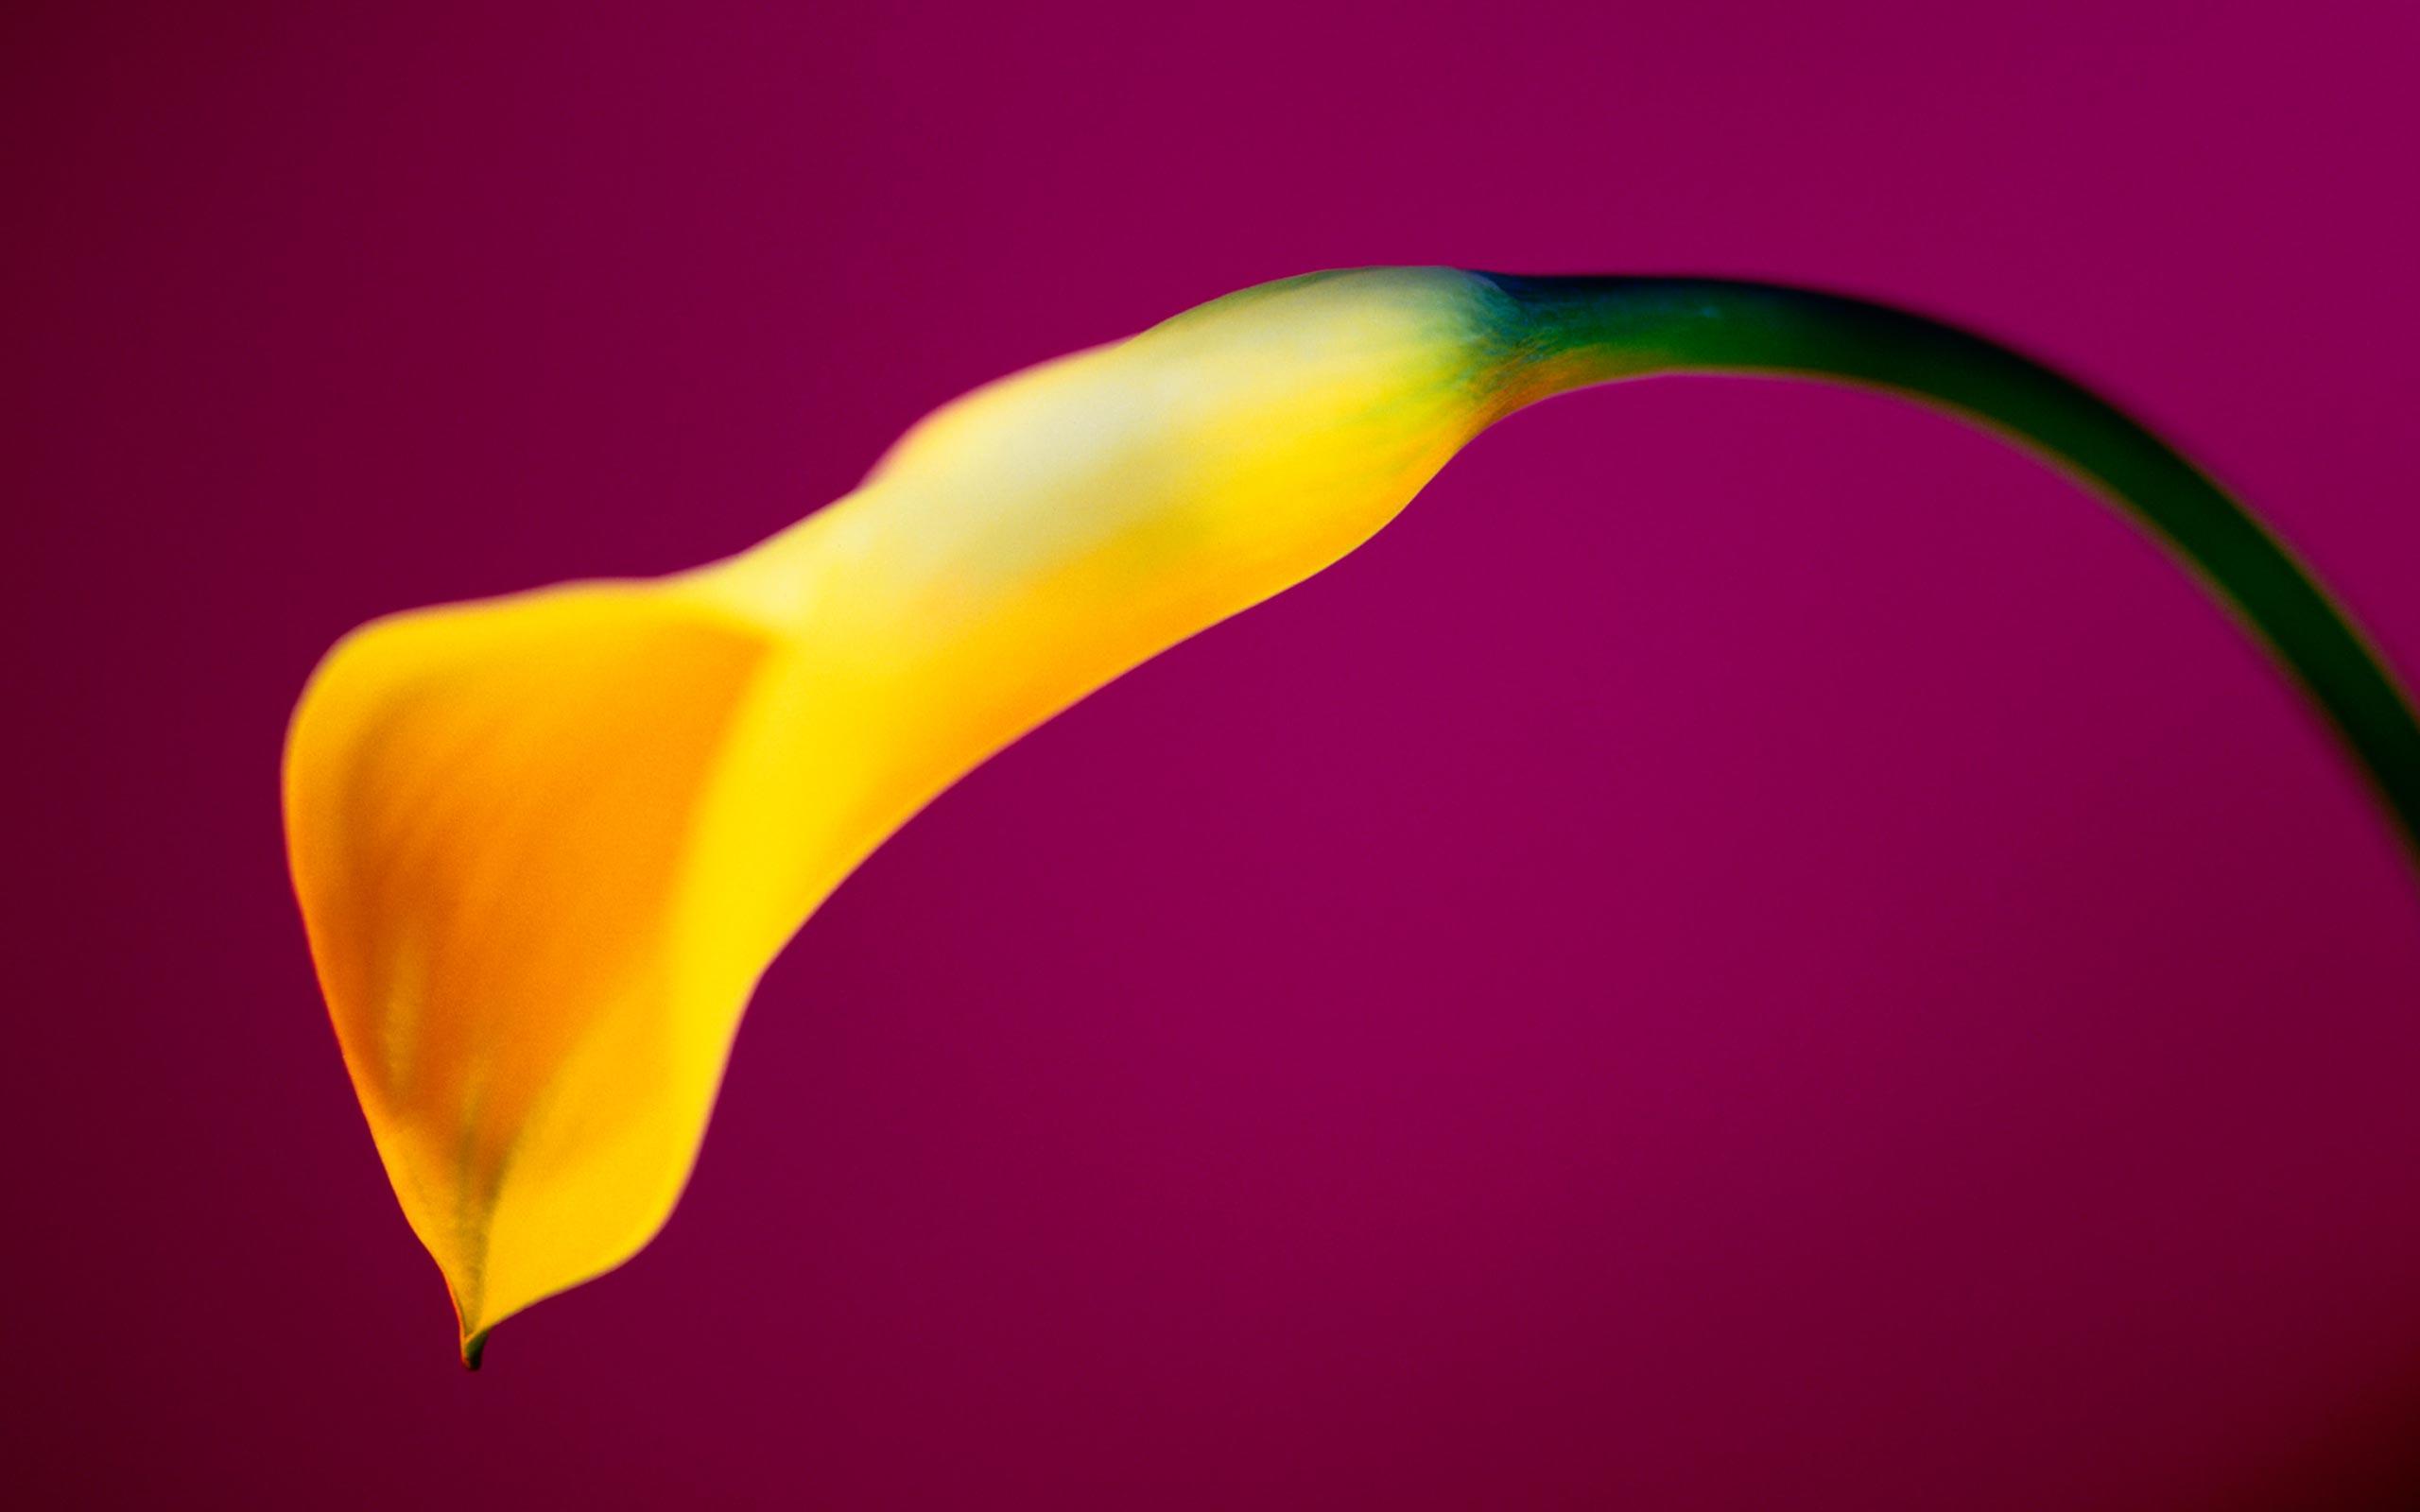 Calla Lily Flowers HD Wallpaper. Calla Lily Flowers Picture